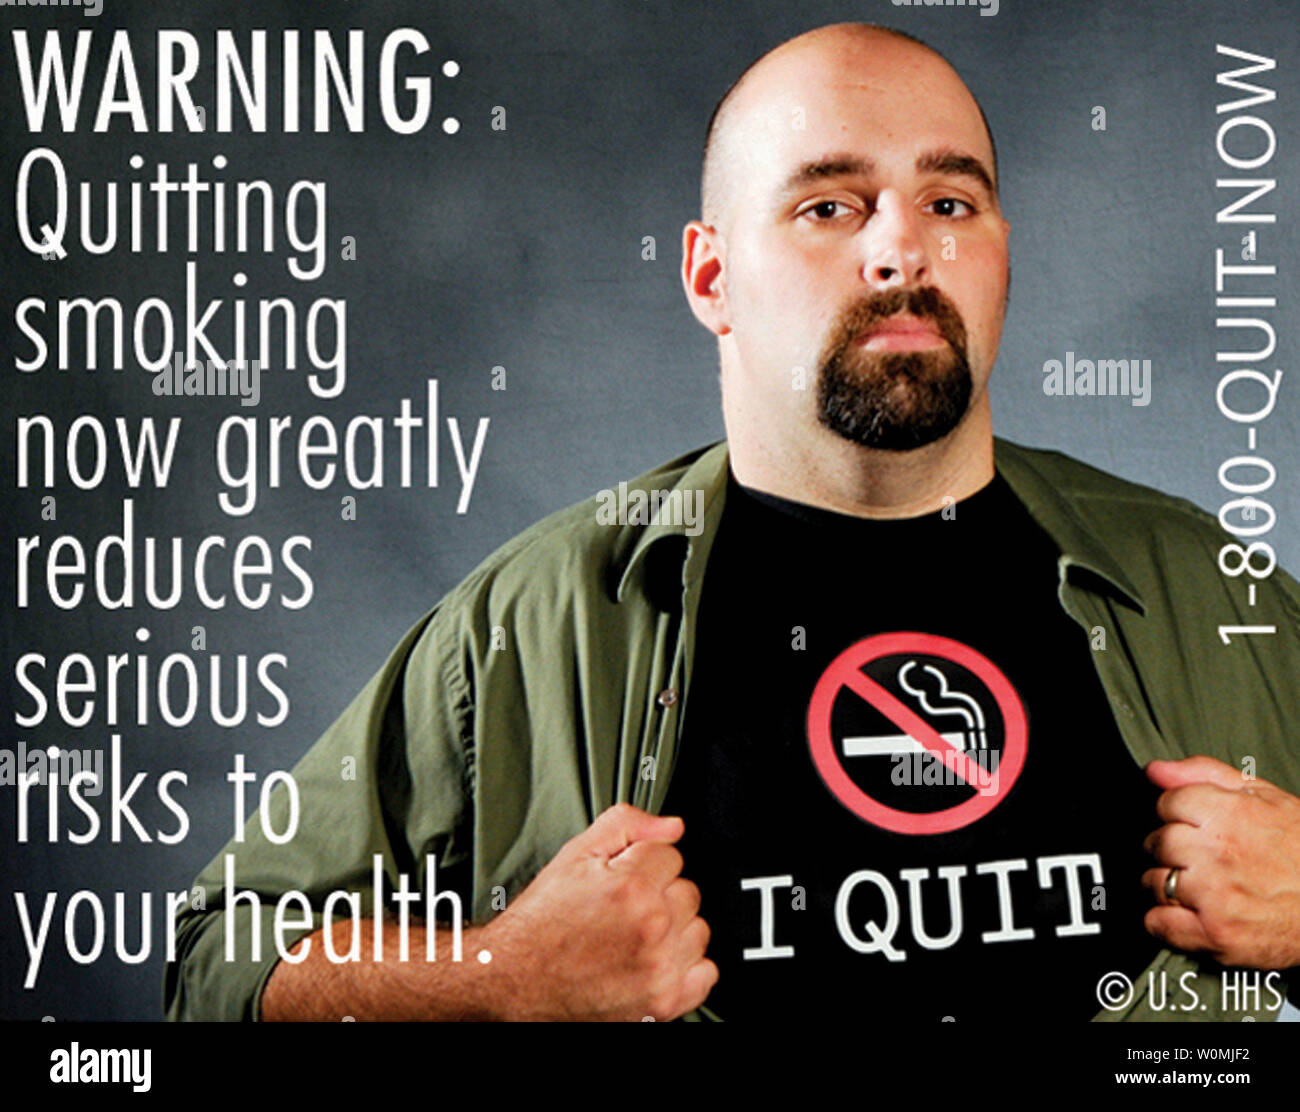 This FDA image released on June 21, 2011 shows one of the new proposed cigarette warning labels. Beginning September 2012, FDA will require larger, more prominent cigarette health warnings on all cigarette packaging and advertisements in the United States.  These warnings mark the first change in cigarette warnings in more than 25 years and are a significant advancement in communicating the dangers of smoking.  UPI/FDA Stock Photo